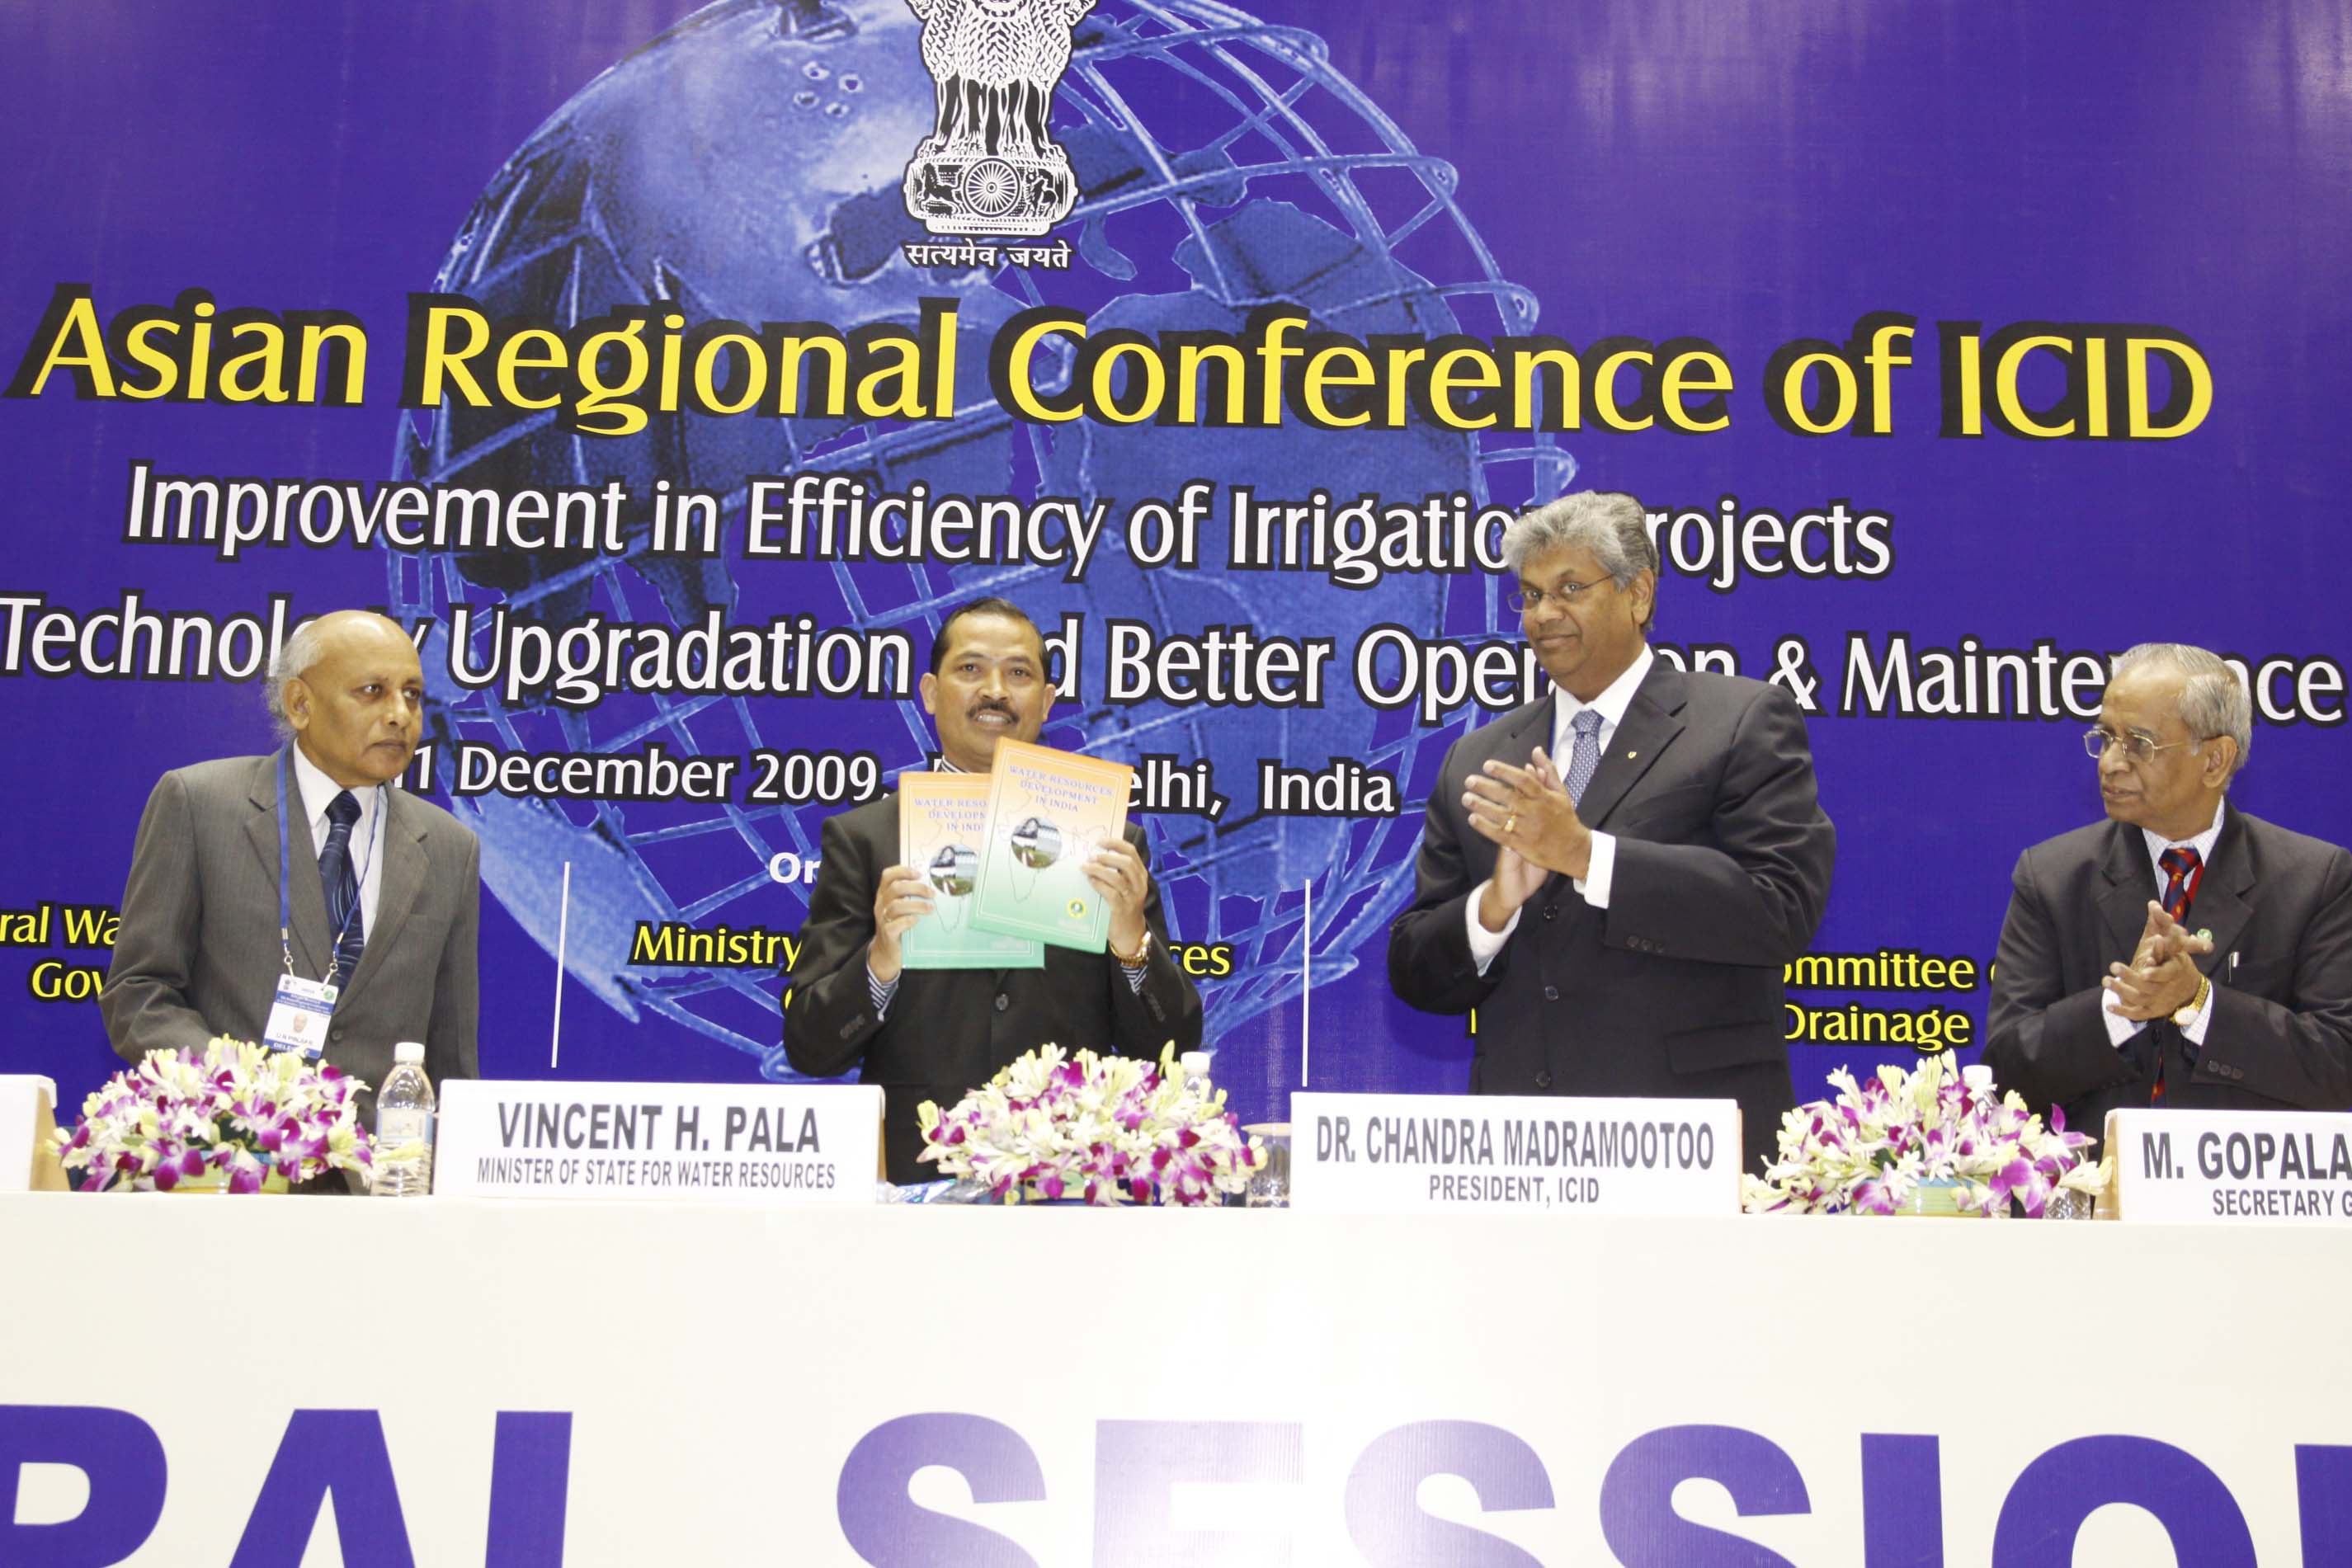 Hon'ble Minister releasing the Publication during 5th Asian Regional Conference, New Delhi, 2009